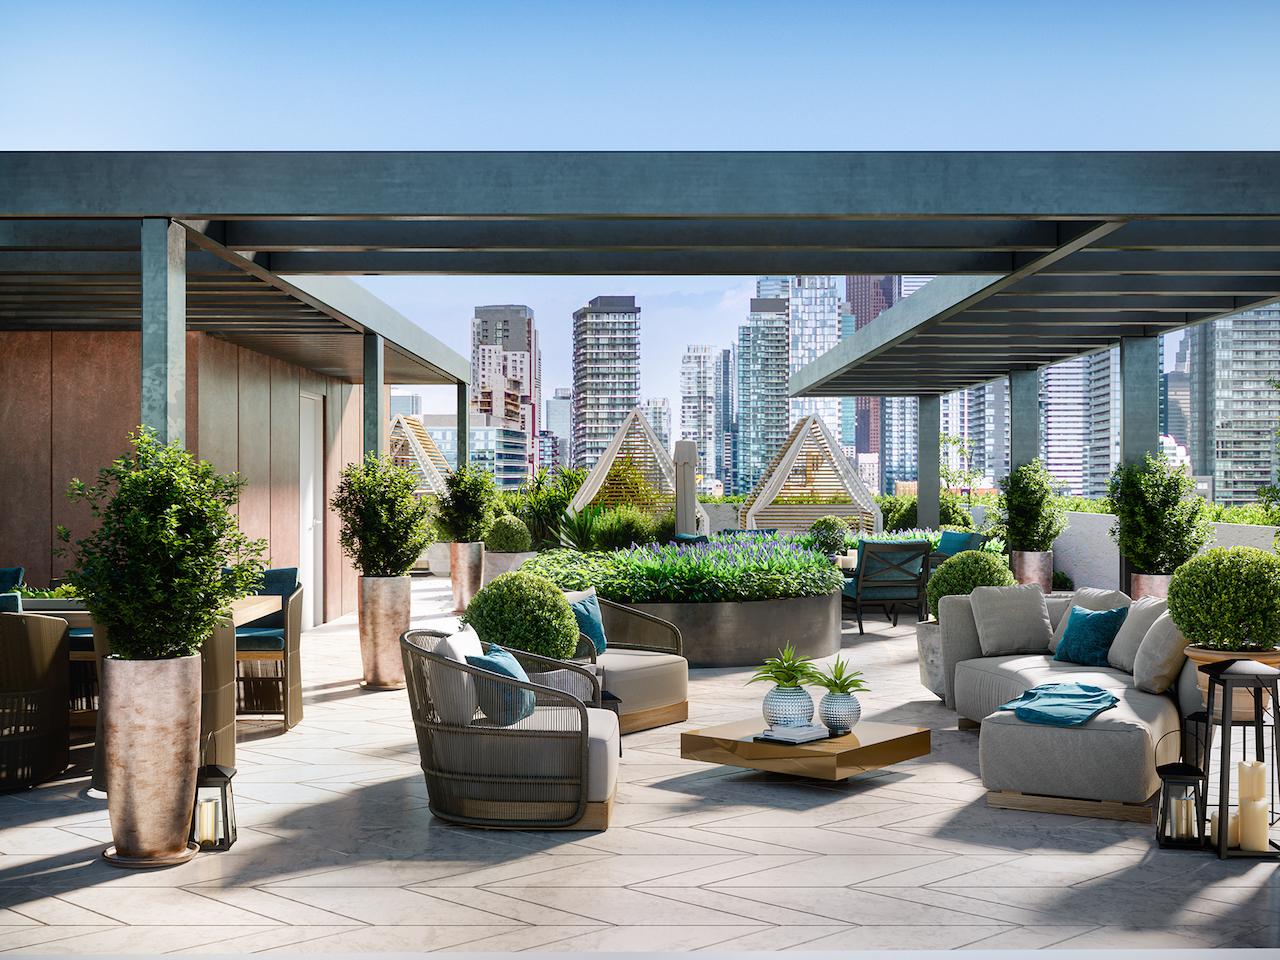 Rendering of 123 Portland Condos rooftop terrace with seating and greenery.